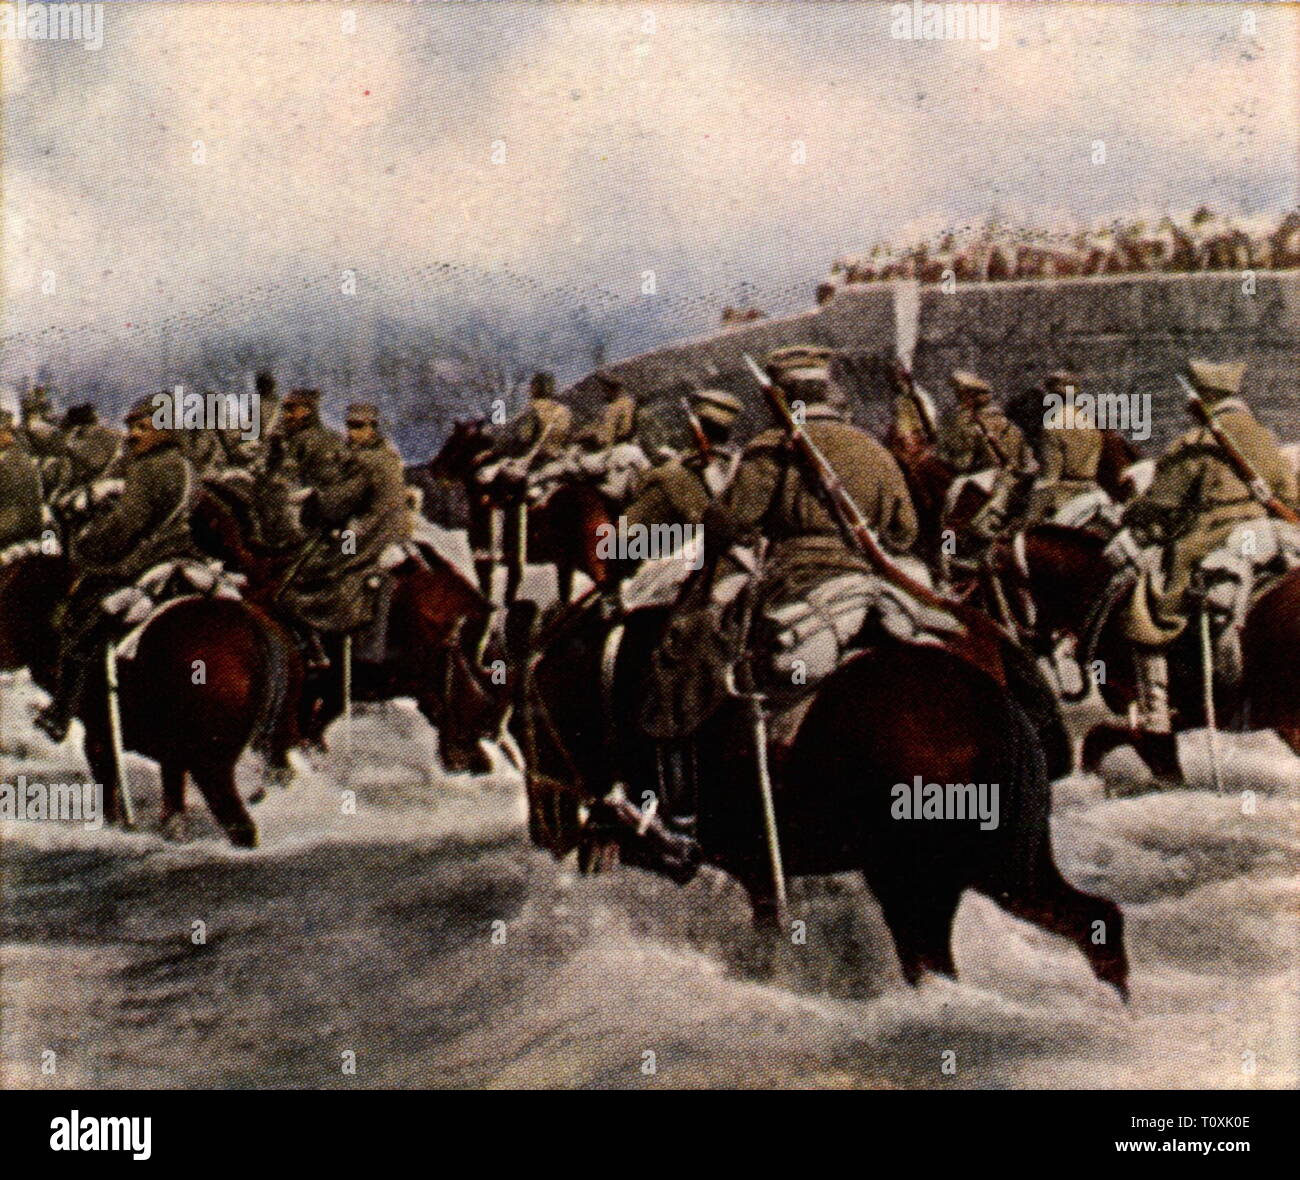 Greco-Turkish War 1919 - 1922, Greek cavalry is crossing a river, coloured photograph, cigarette card, series 'Die Nachkriegszeit', 1935, Greco - Turkish, horseman, horsemen, cavalryman, cavalrymen, horse, horses, soldiers, soldier, military, Greece, Turkey, Anatolia, people, 1920s, 20th century, war, wars, Greek, Grecian, cavalry, cavalries, crossing, cross, river, rivers, coloured, colored, post war period, post-war period, post-war years, post-war era, historic, historical, Additional-Rights-Clearance-Info-Not-Available Stock Photo